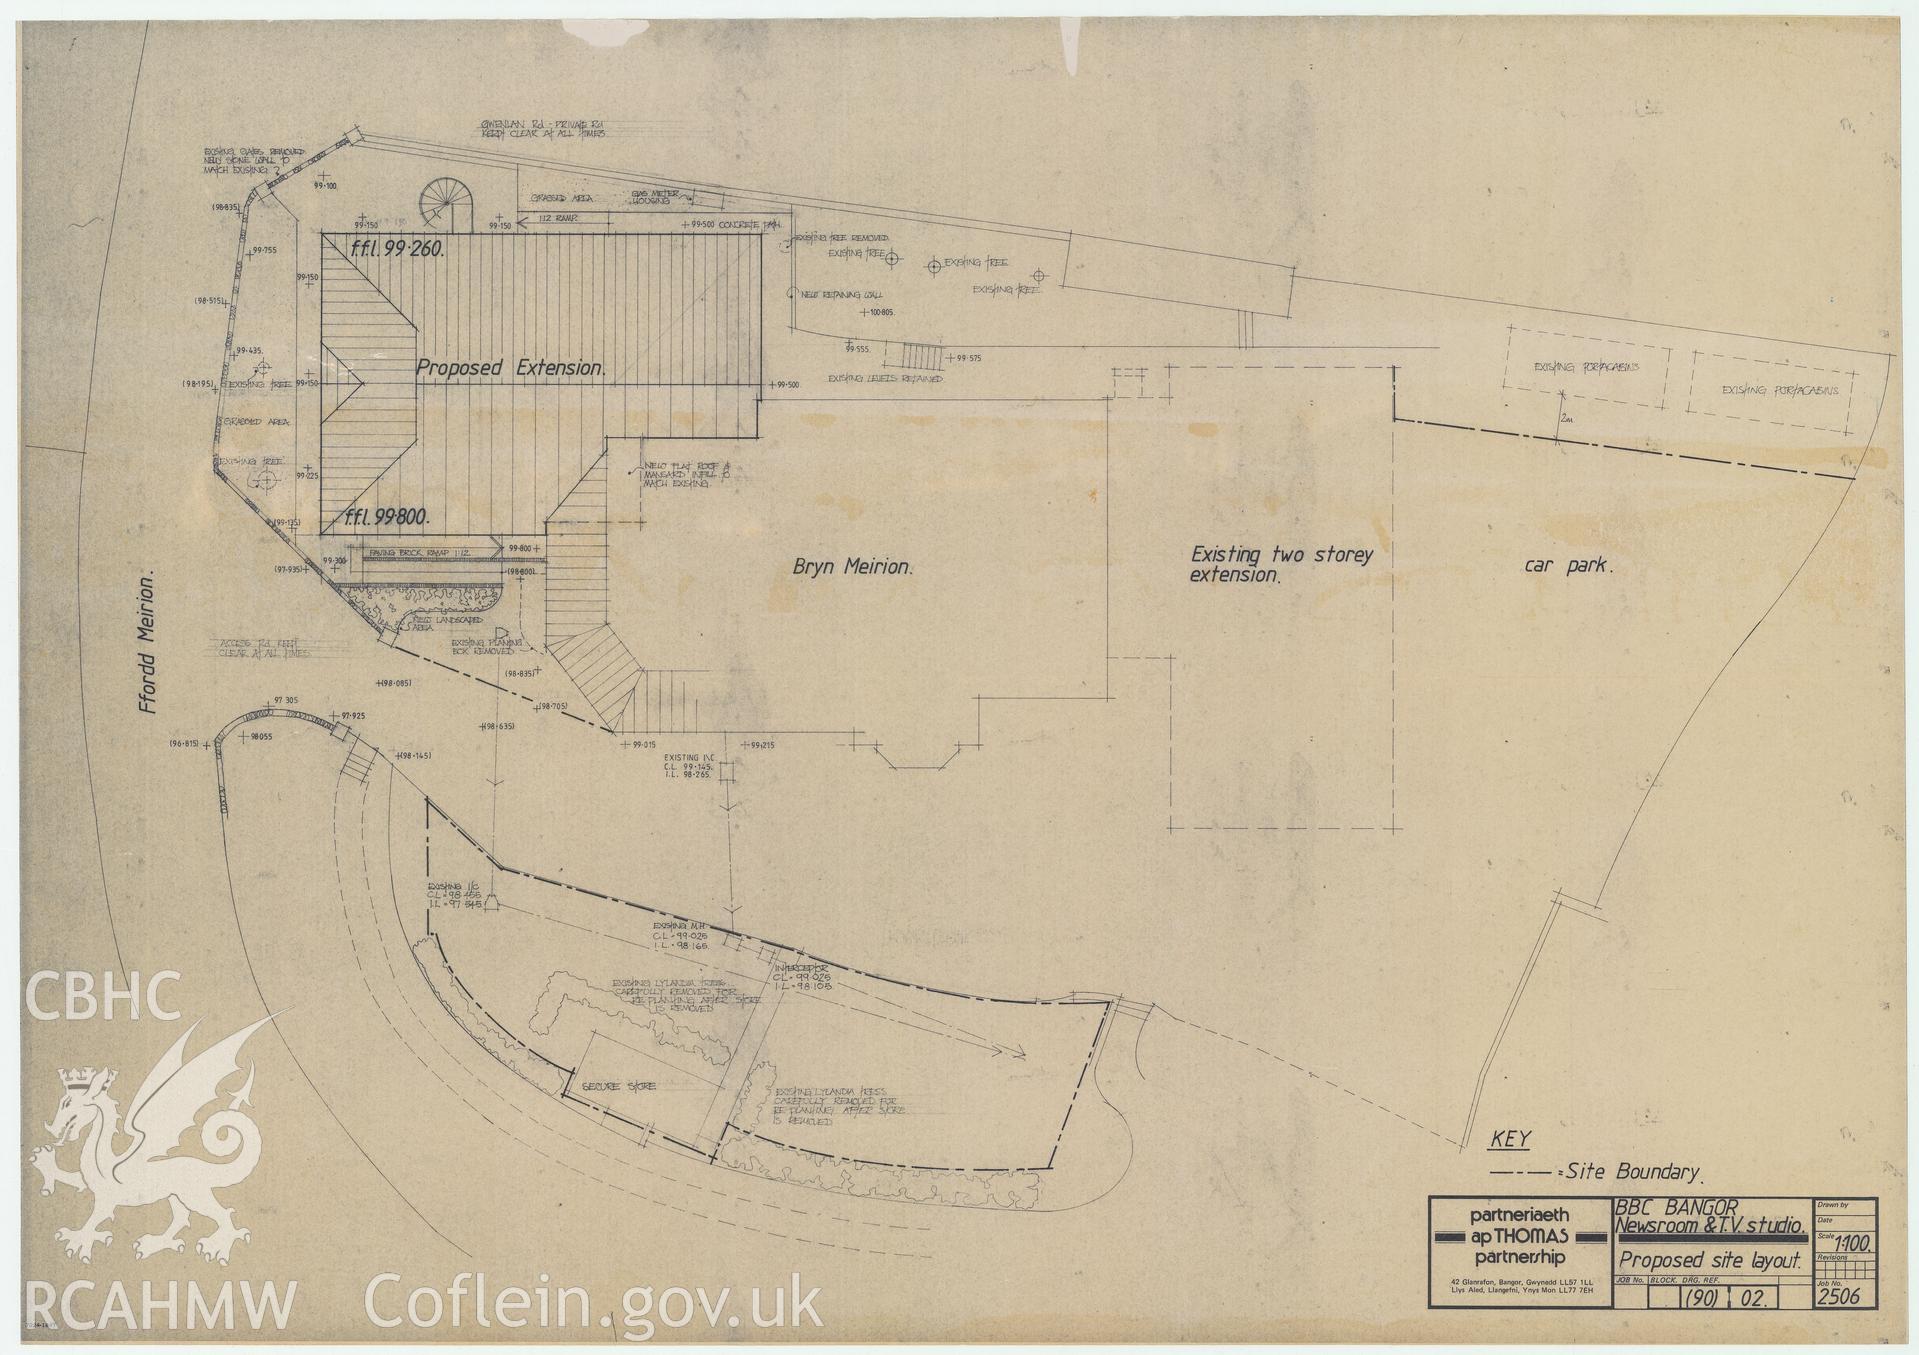 BBC premises, Broadcasting House, Bangor - site layout drawing of Bryn Meirion. Drawing No. (90) 02, July 1988.